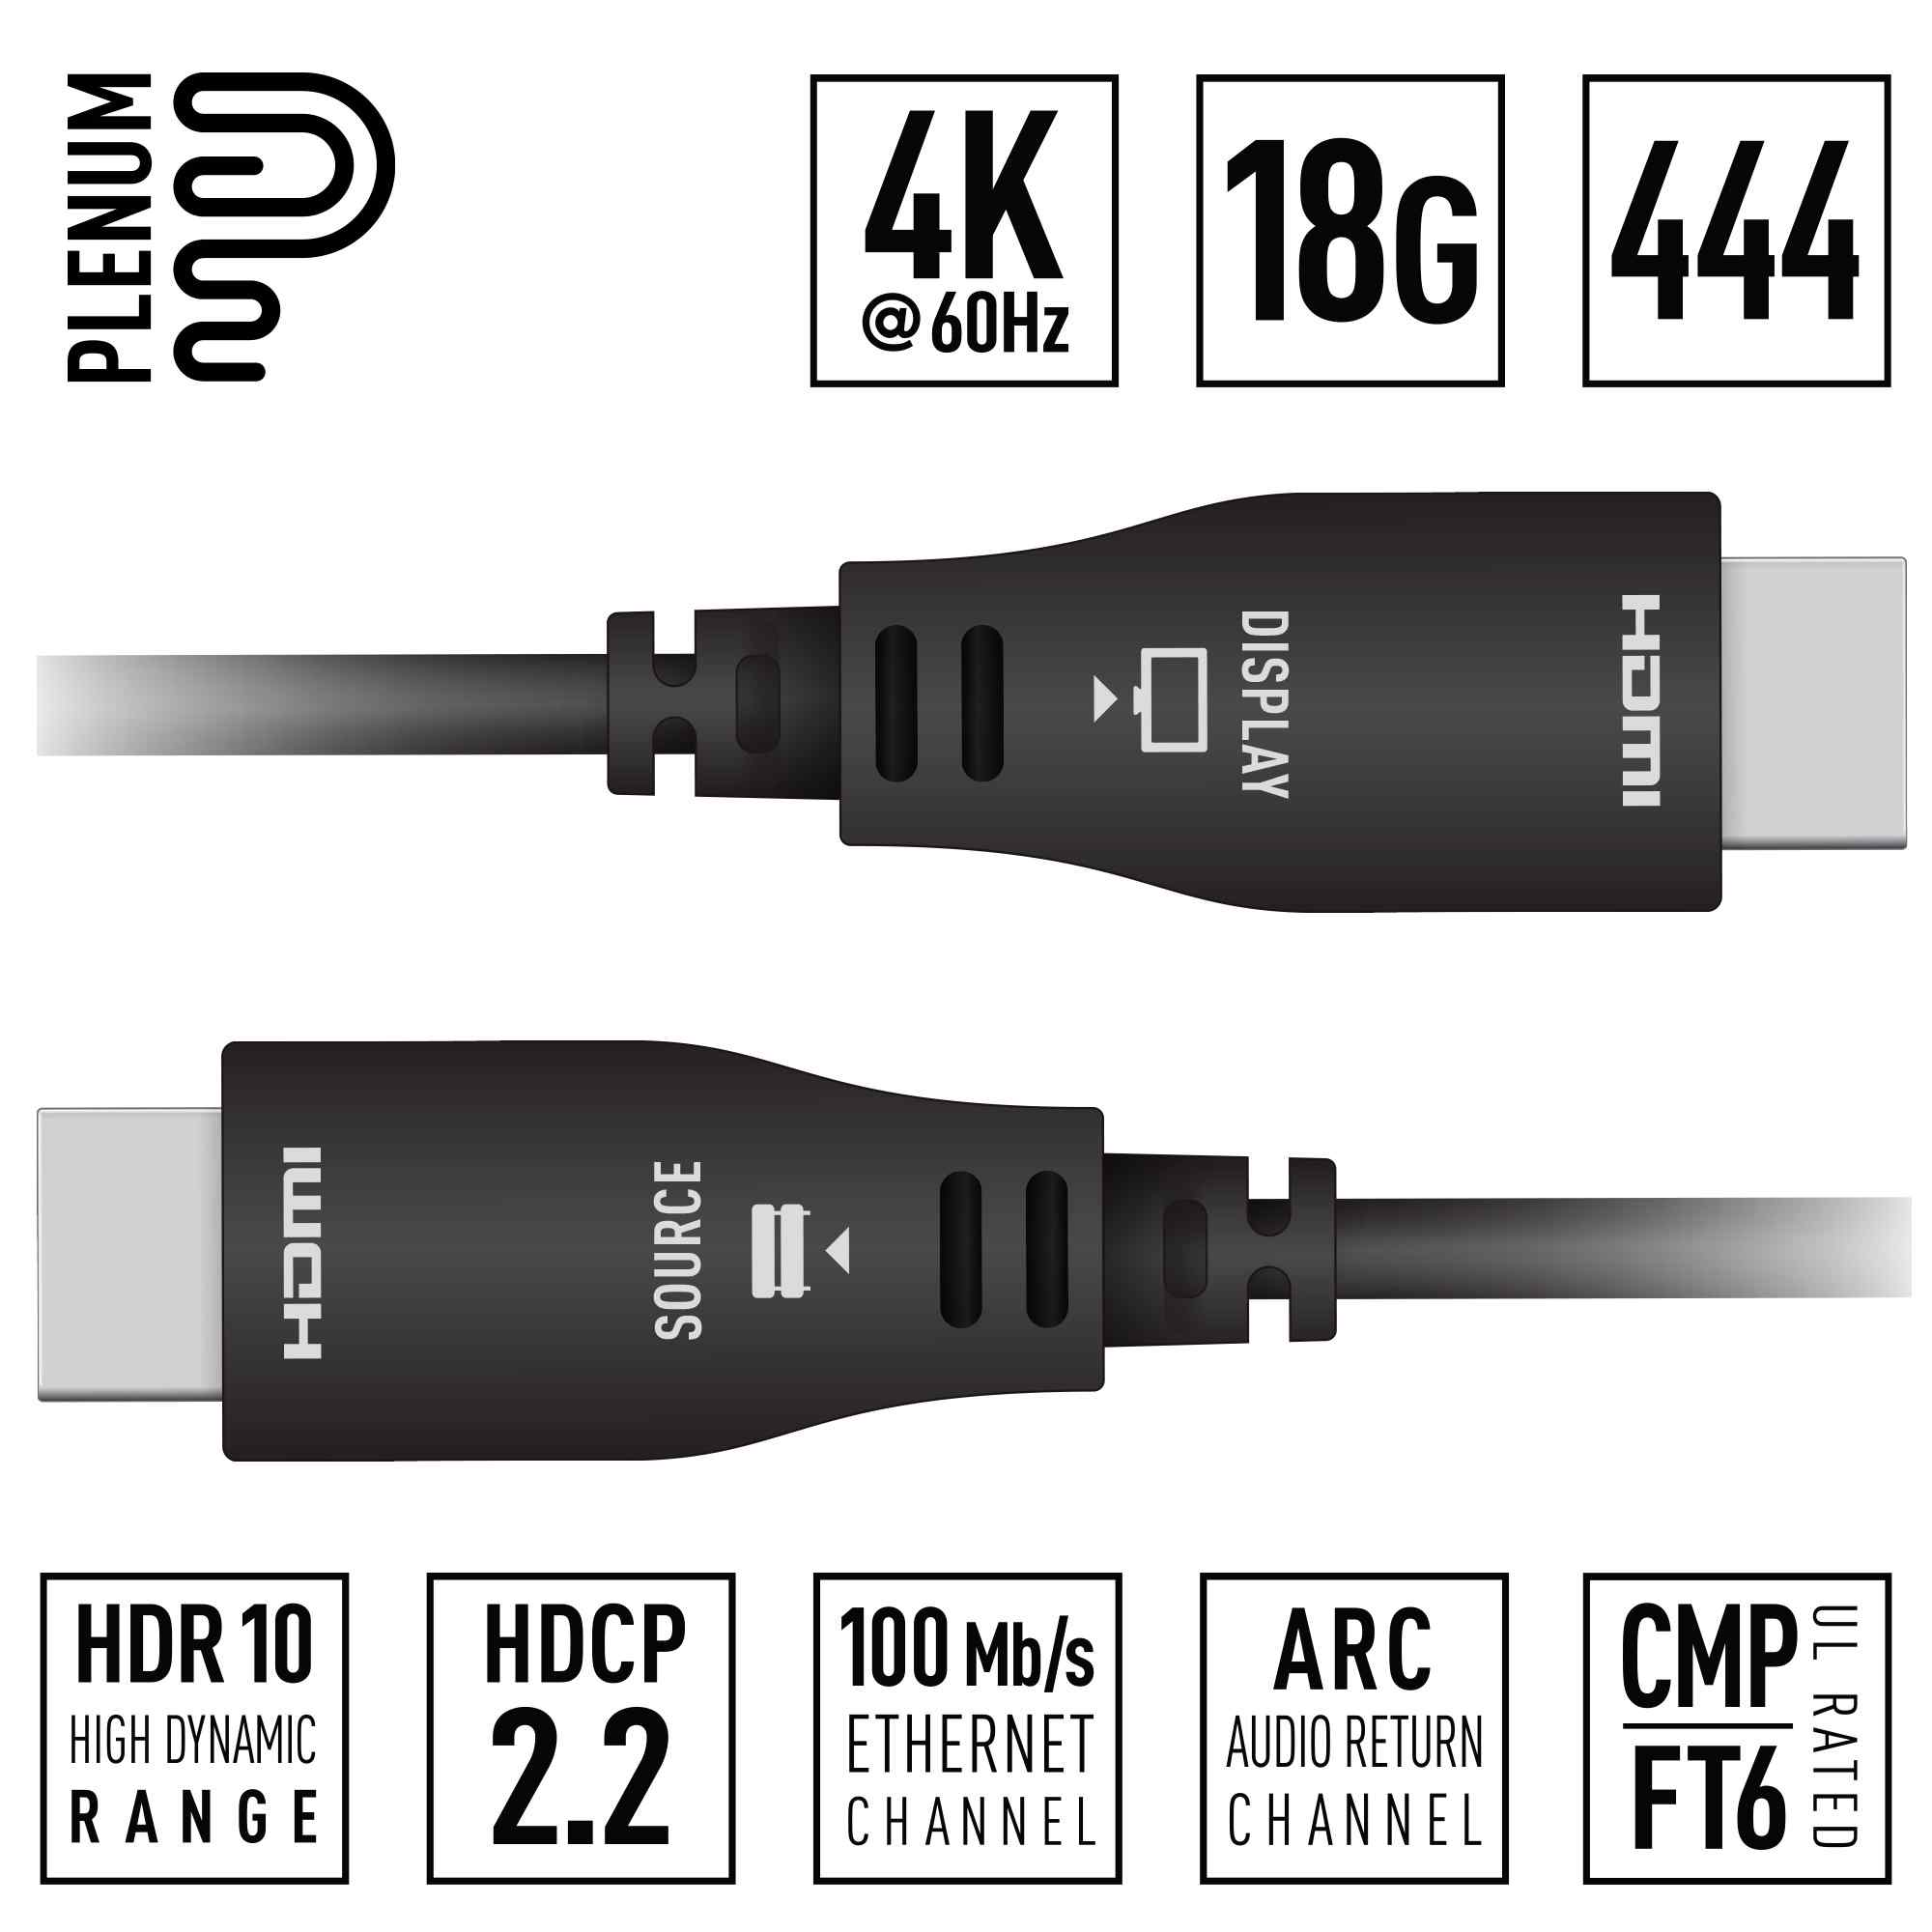 Key Digital 262FT (80M) 4K@60Hz/444/18G - Plenum Active Optical HDMI Cable, CMP/FT6 UL Rated - KD-AOCH262P